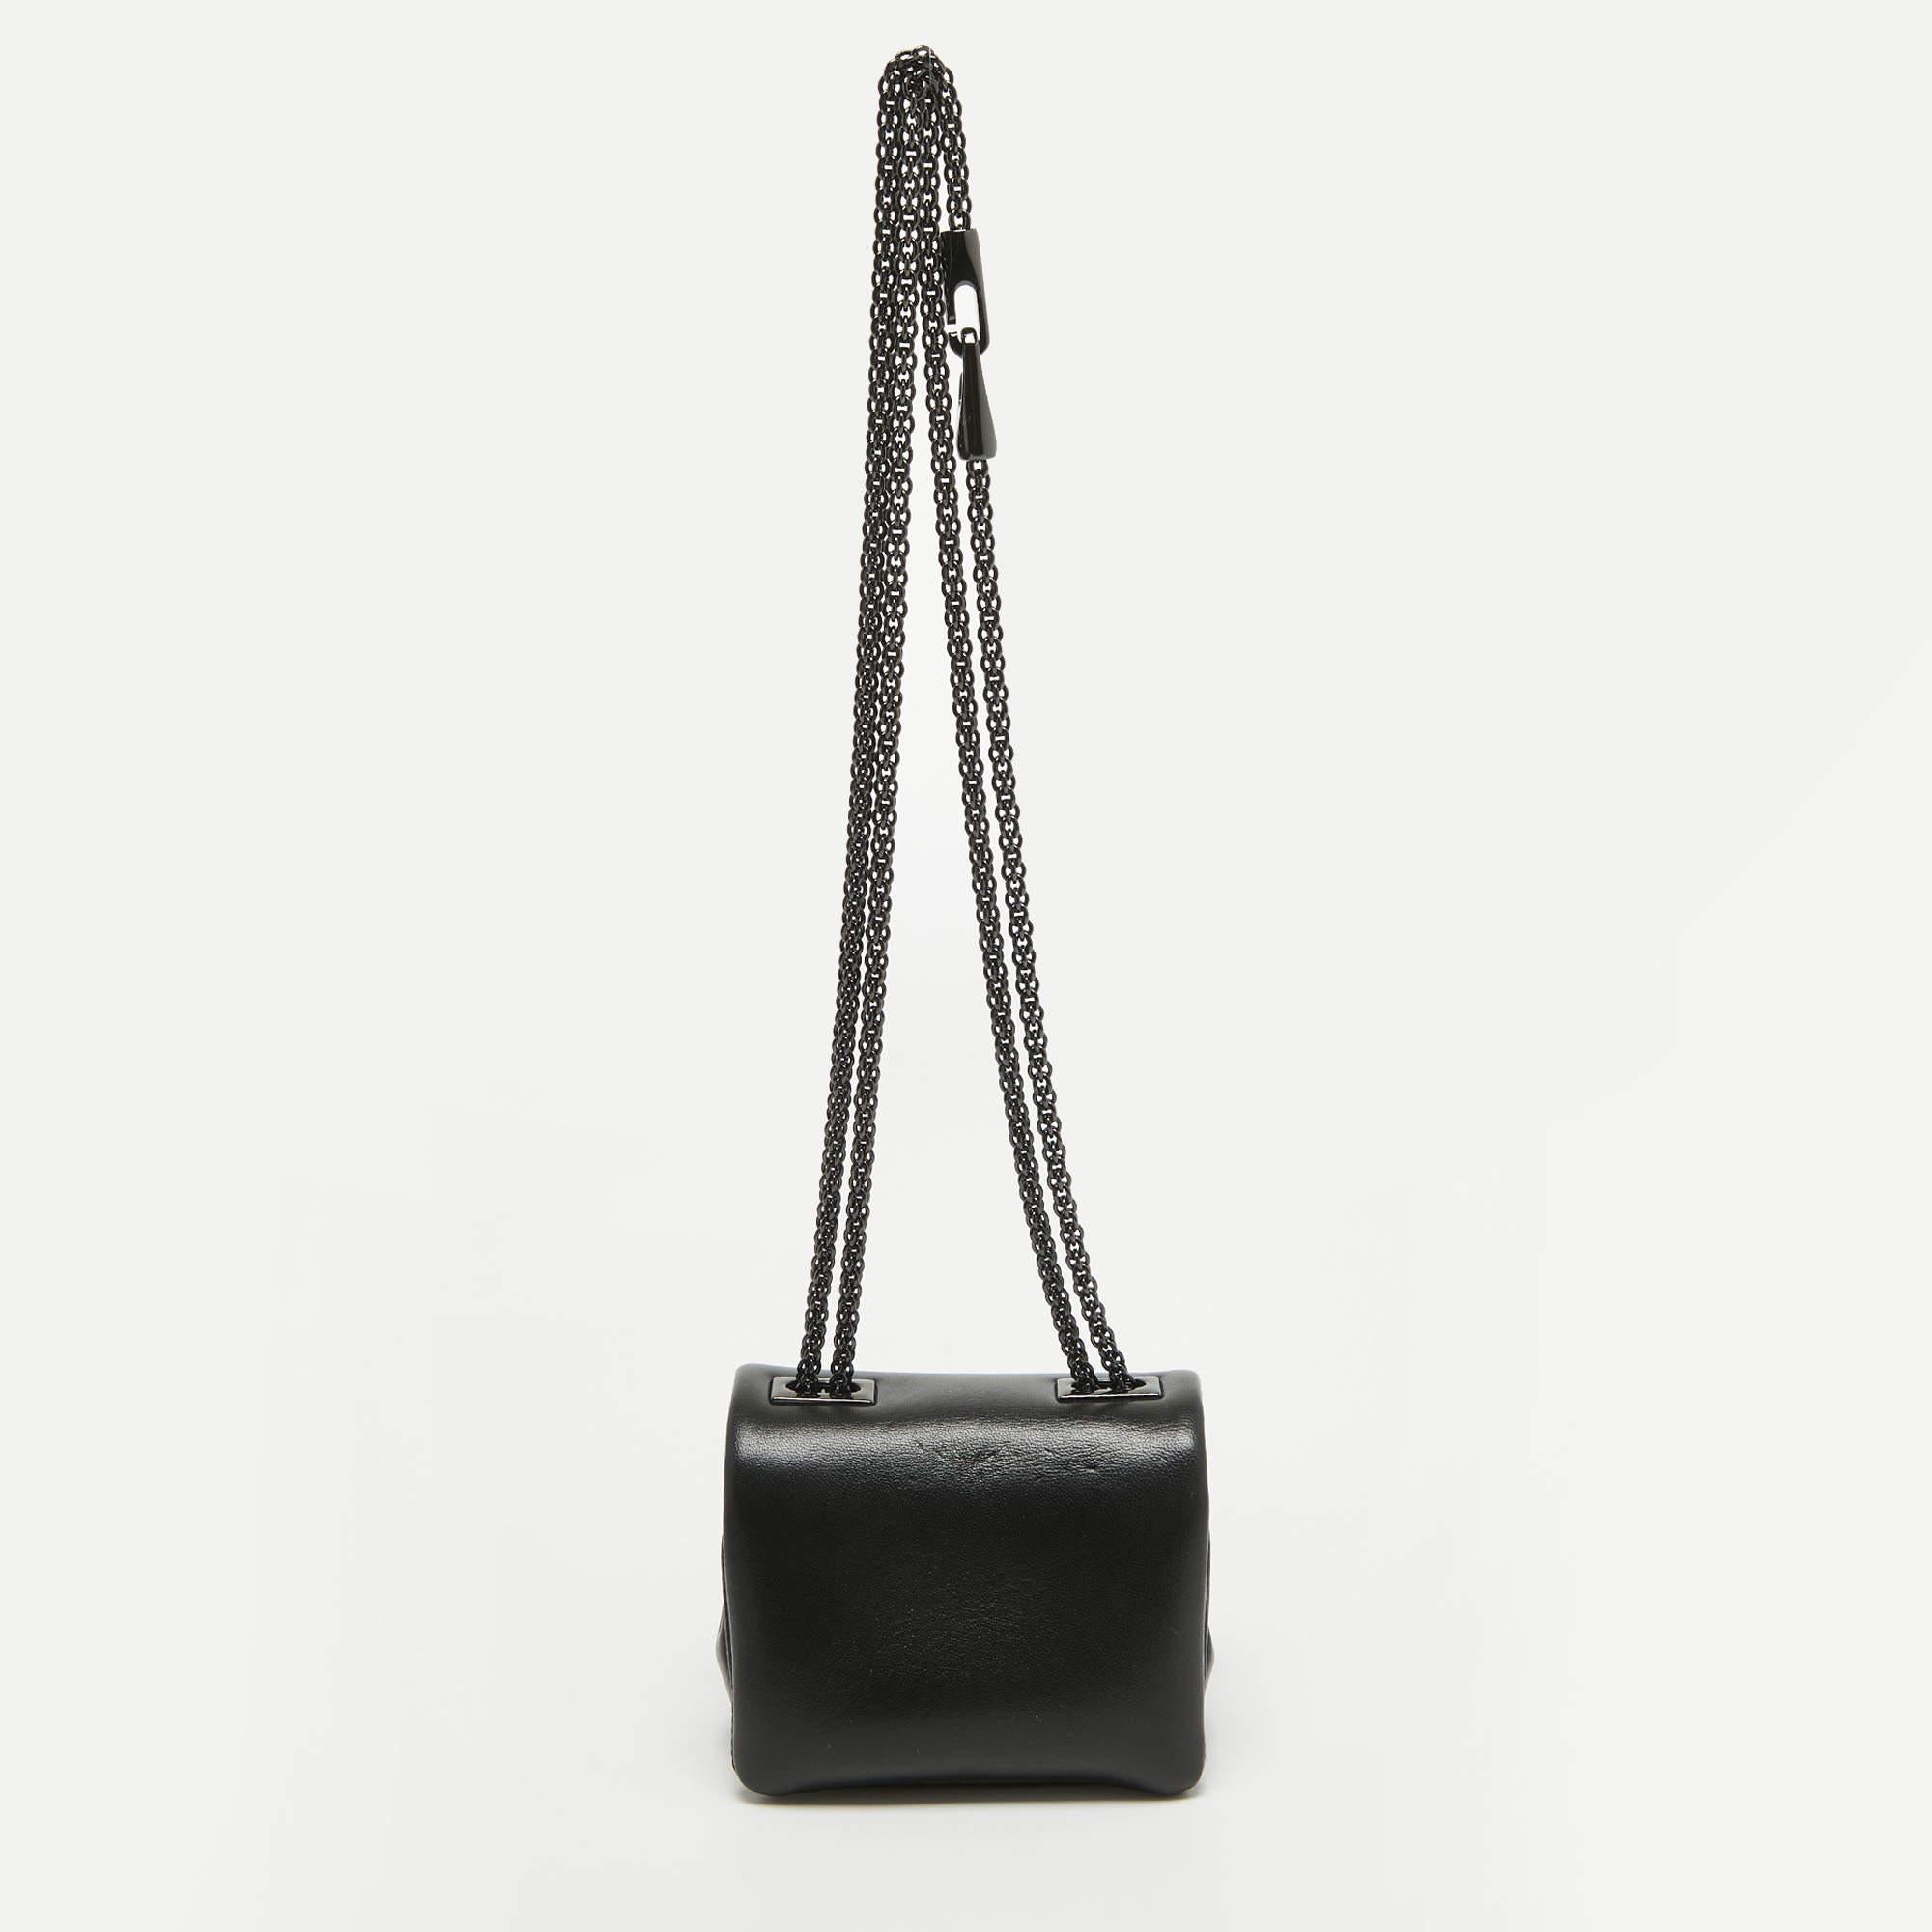 If you're a fan of micro-sized bags, this Valentino One Stud bag is for you. It is fashioned in black leather and punctuated by a single pyramid stud.

Includes: Original Dustbag, Original Box, Info Booklet

